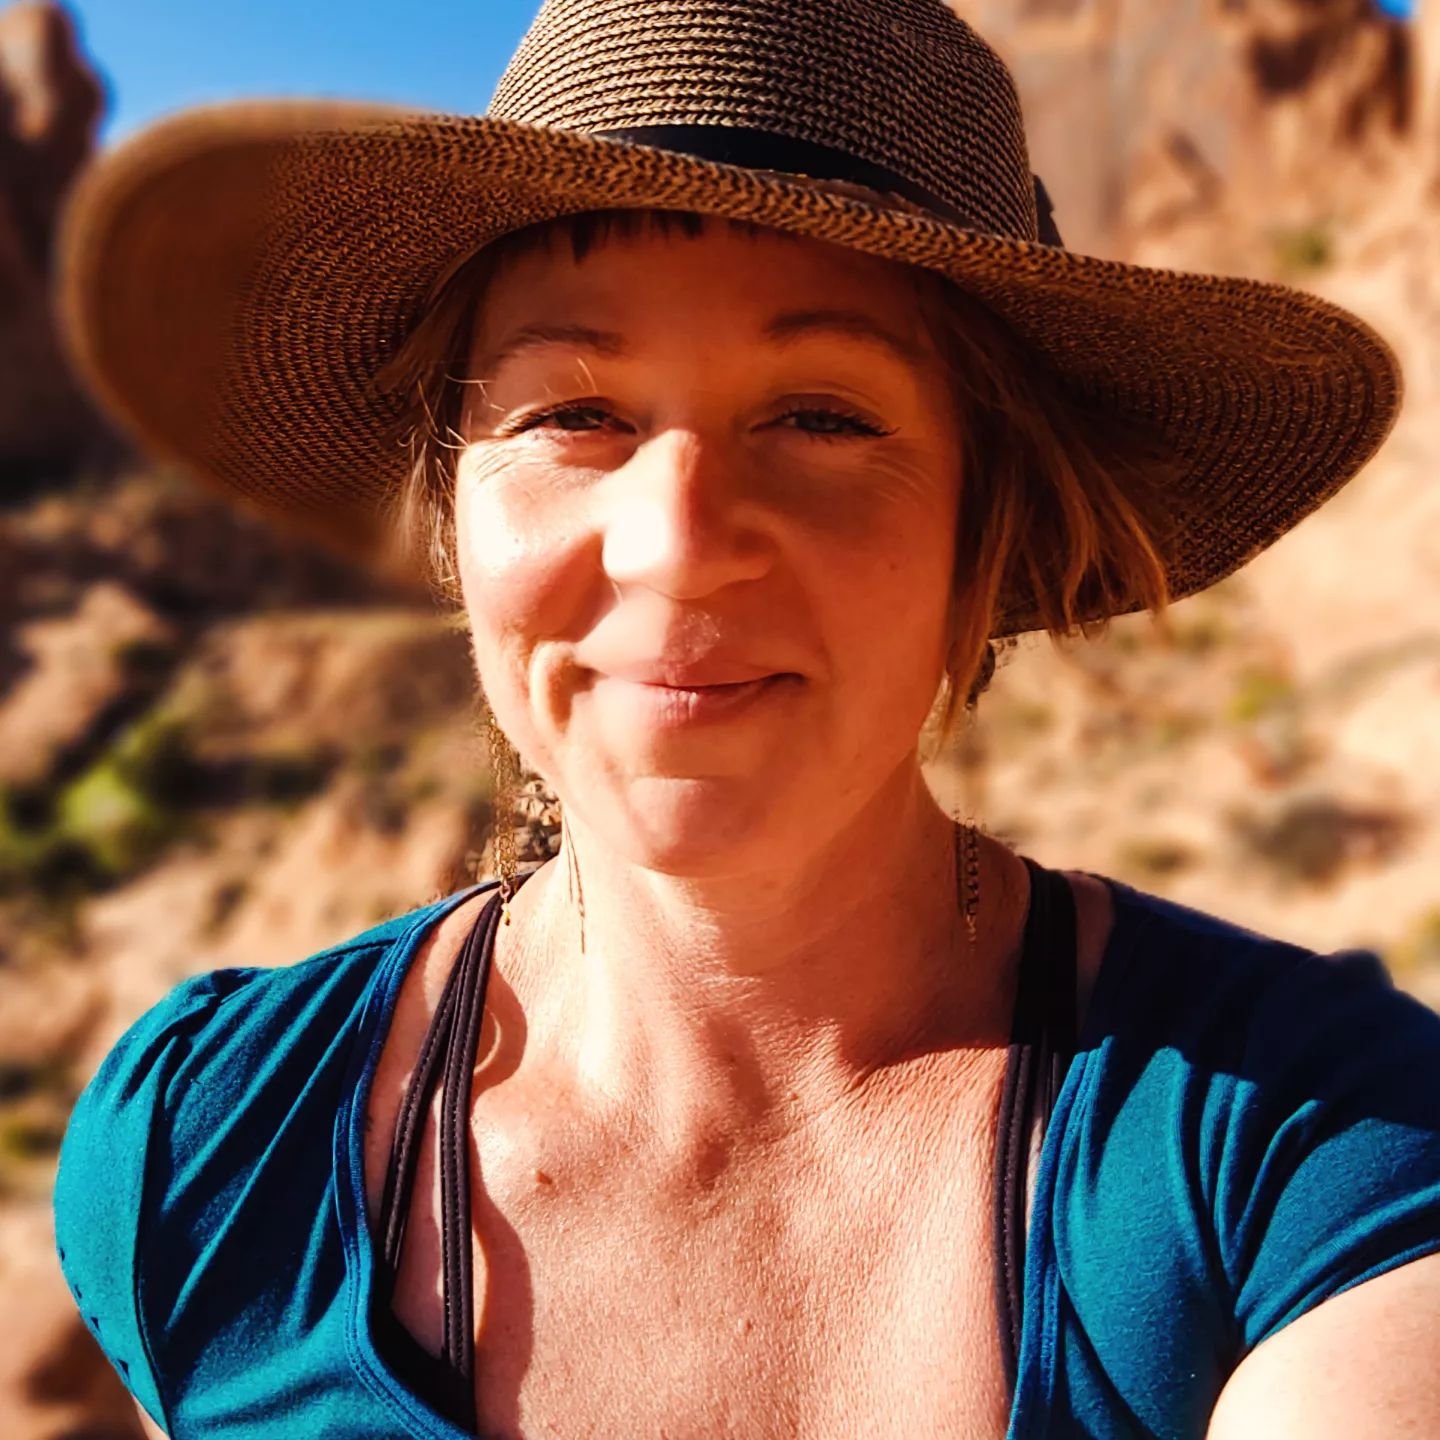 Howdy, I'm Annie! Originally born in Moab, I left when I was 4 and ended up growing up all around the southwest. I graduated with a BA from Arizona State in 2005. I continued to wander the western states in my 20&rsquo;s before settling back in my ho